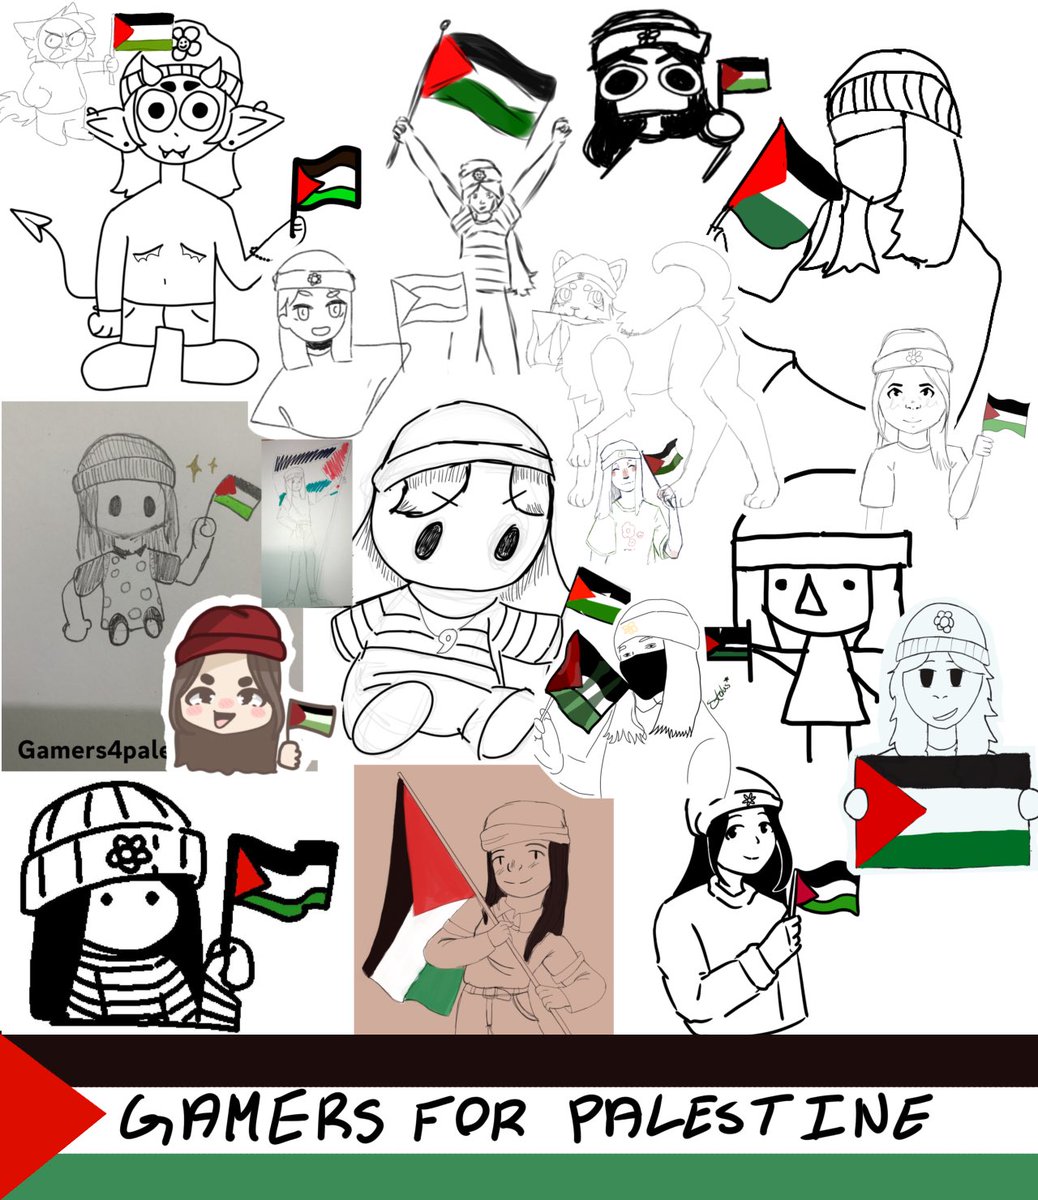 So many amazing artists are working on #Gamers4Palestine !! If you’d like to get yourself a cool piece of art while also supporting a great cause, consider donating!! More info below